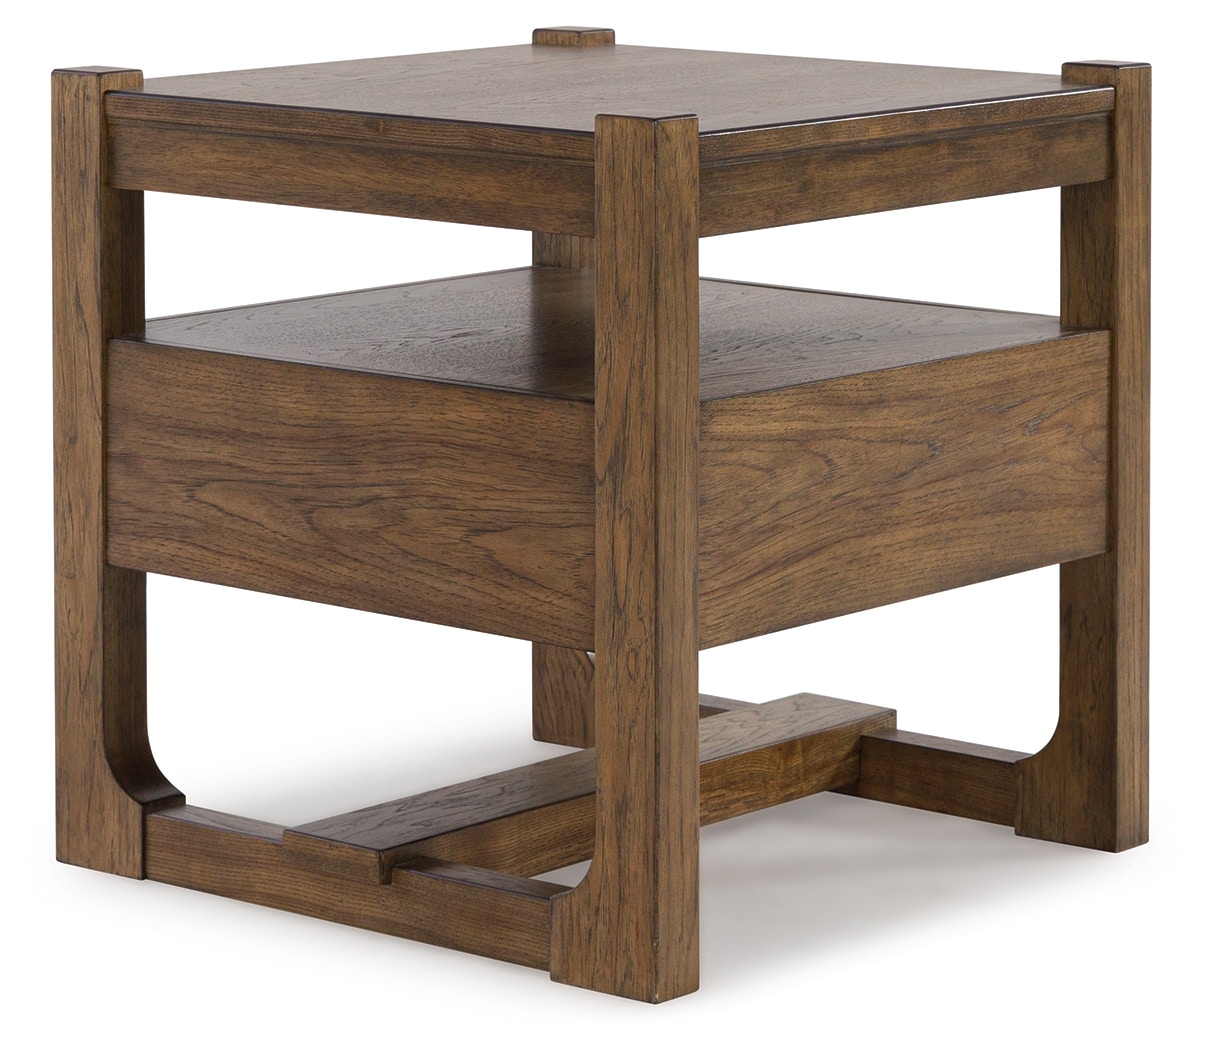 Signature Design by Ashley Living Room Cabalynn End Table T974-2 